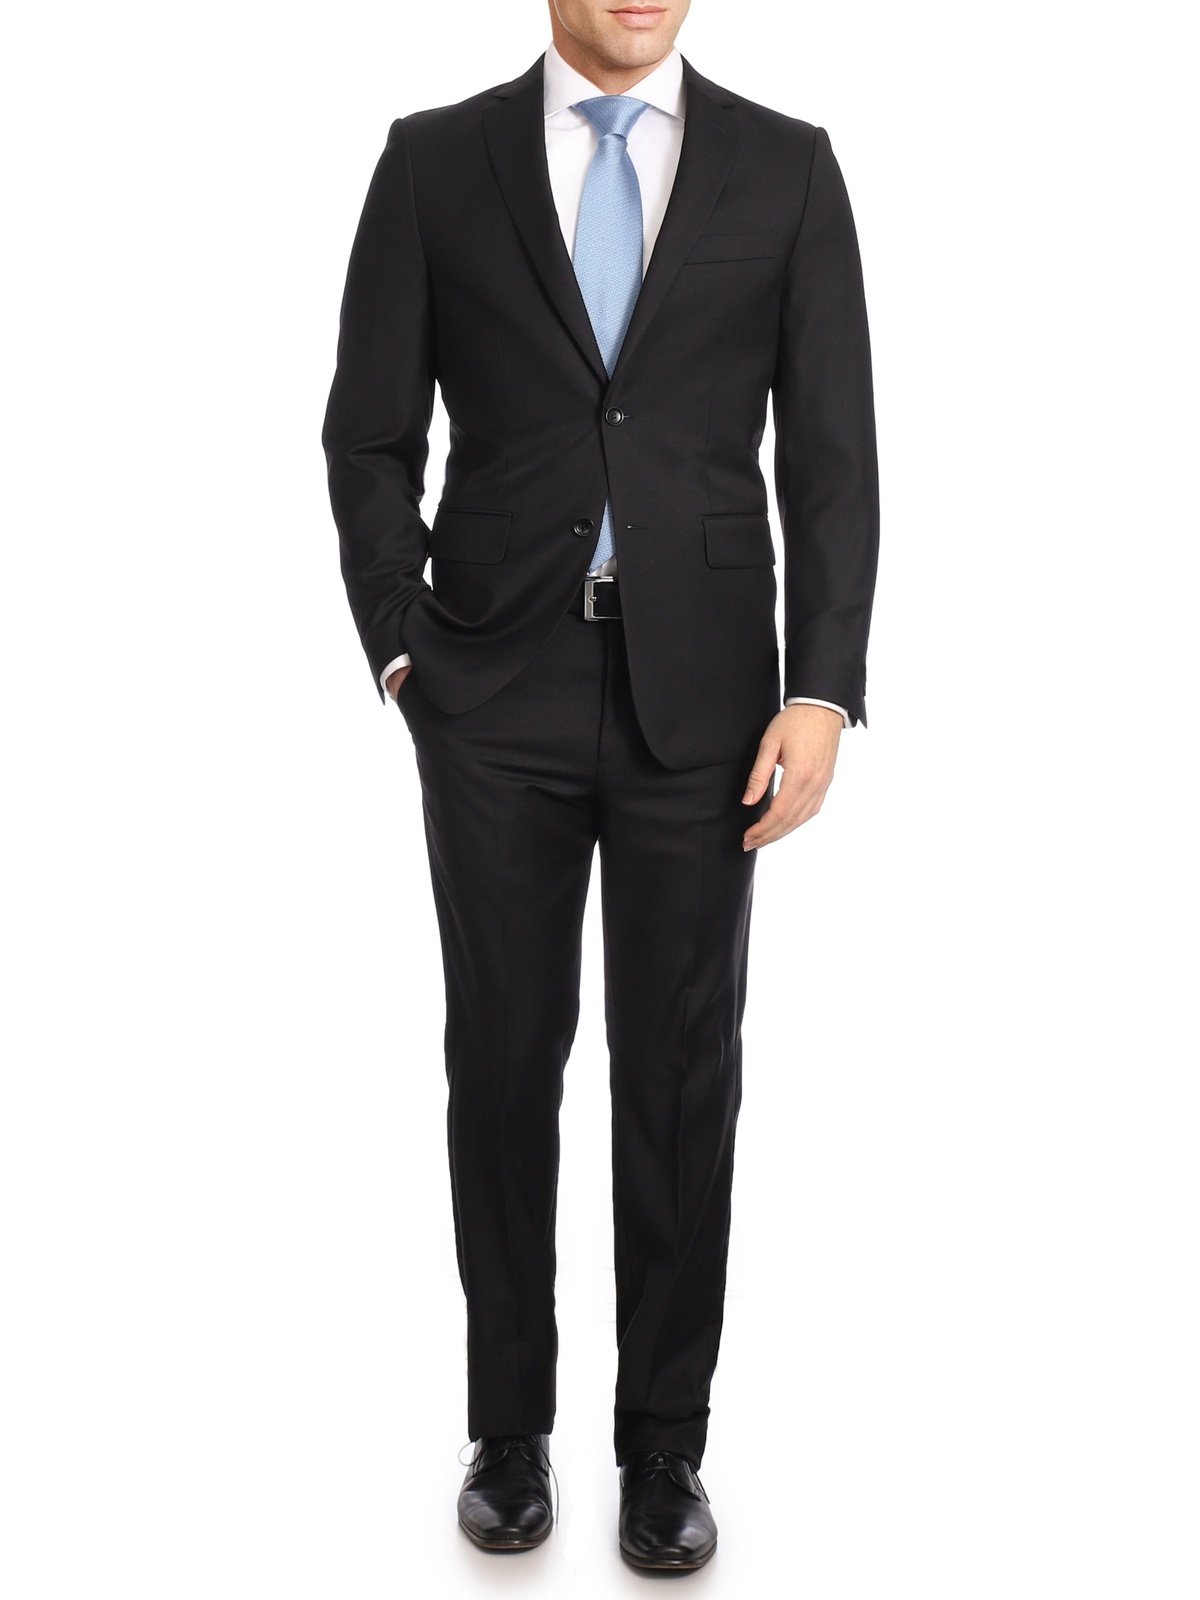 Label M Bestselling Items Mens Classic Fit Two Button 100% Wool Wrinkle Resistant Suit - Solid Black